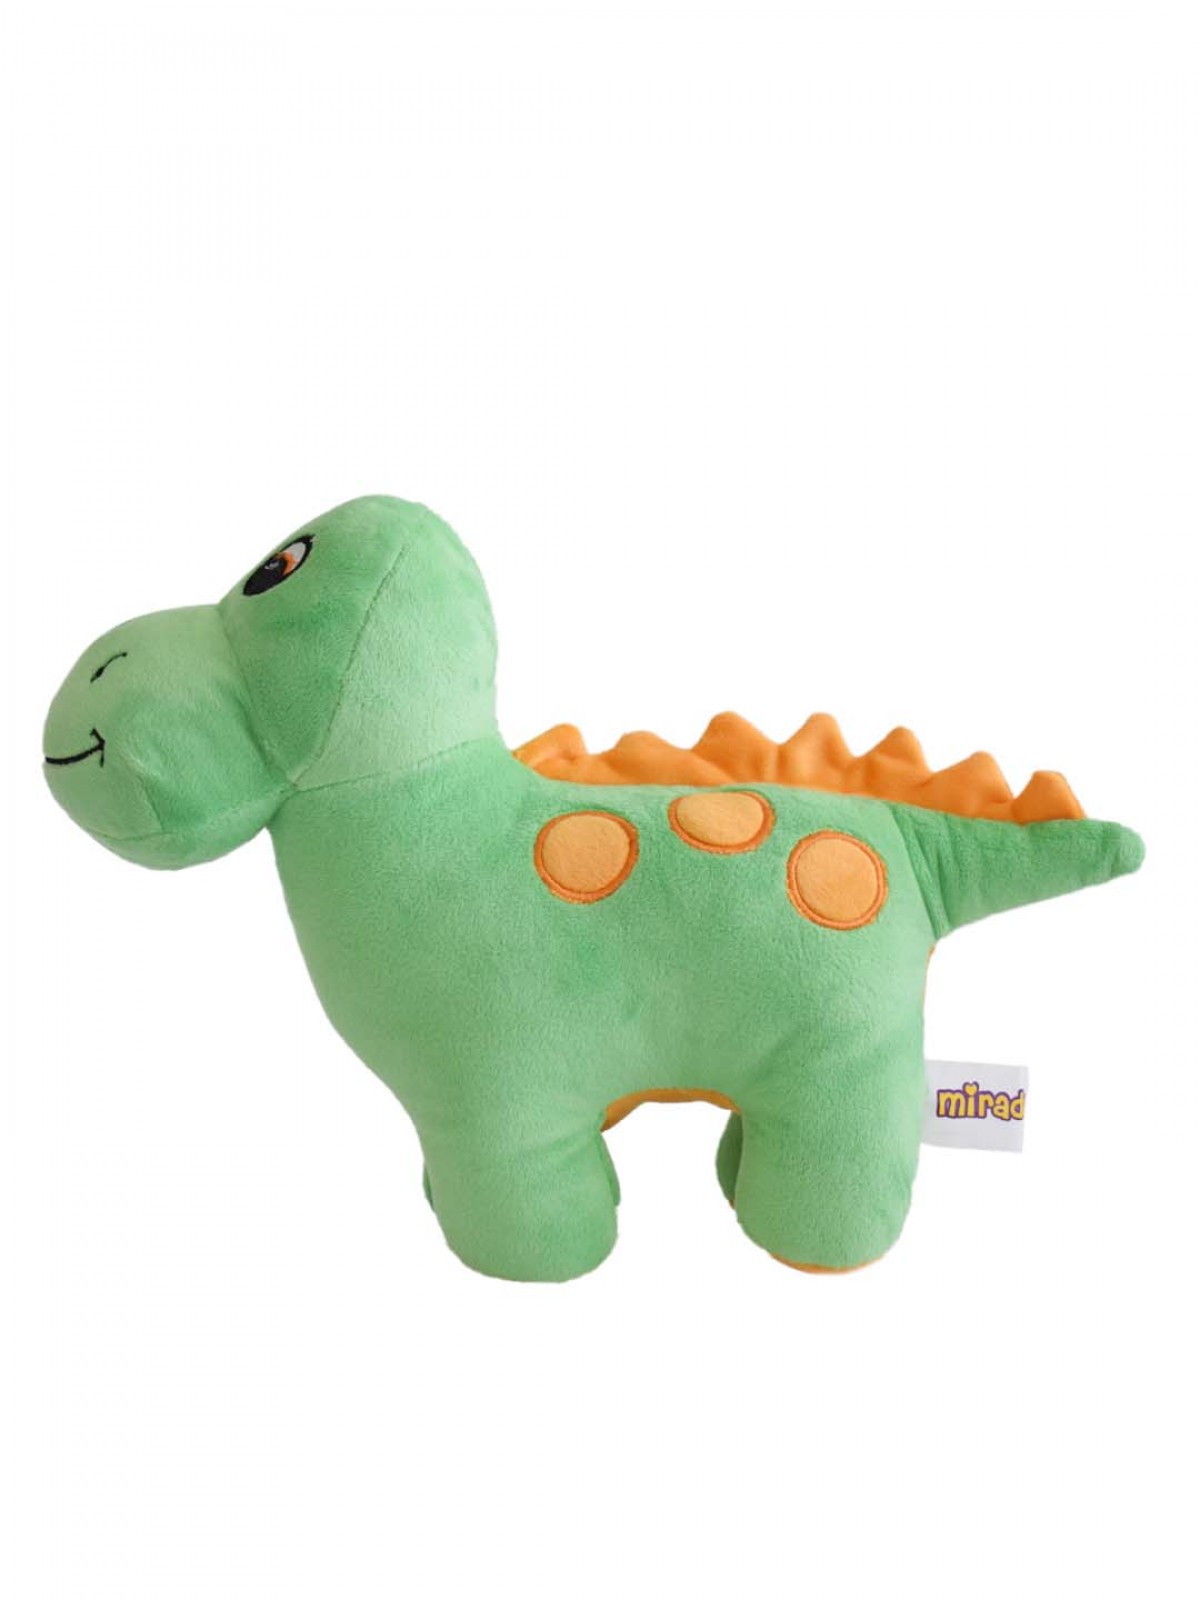 Adorable Stuffed Plush Dinosaur By Mirada, Soft Toys For Kids Of All Ages, 3Y+, Green, 30Cm